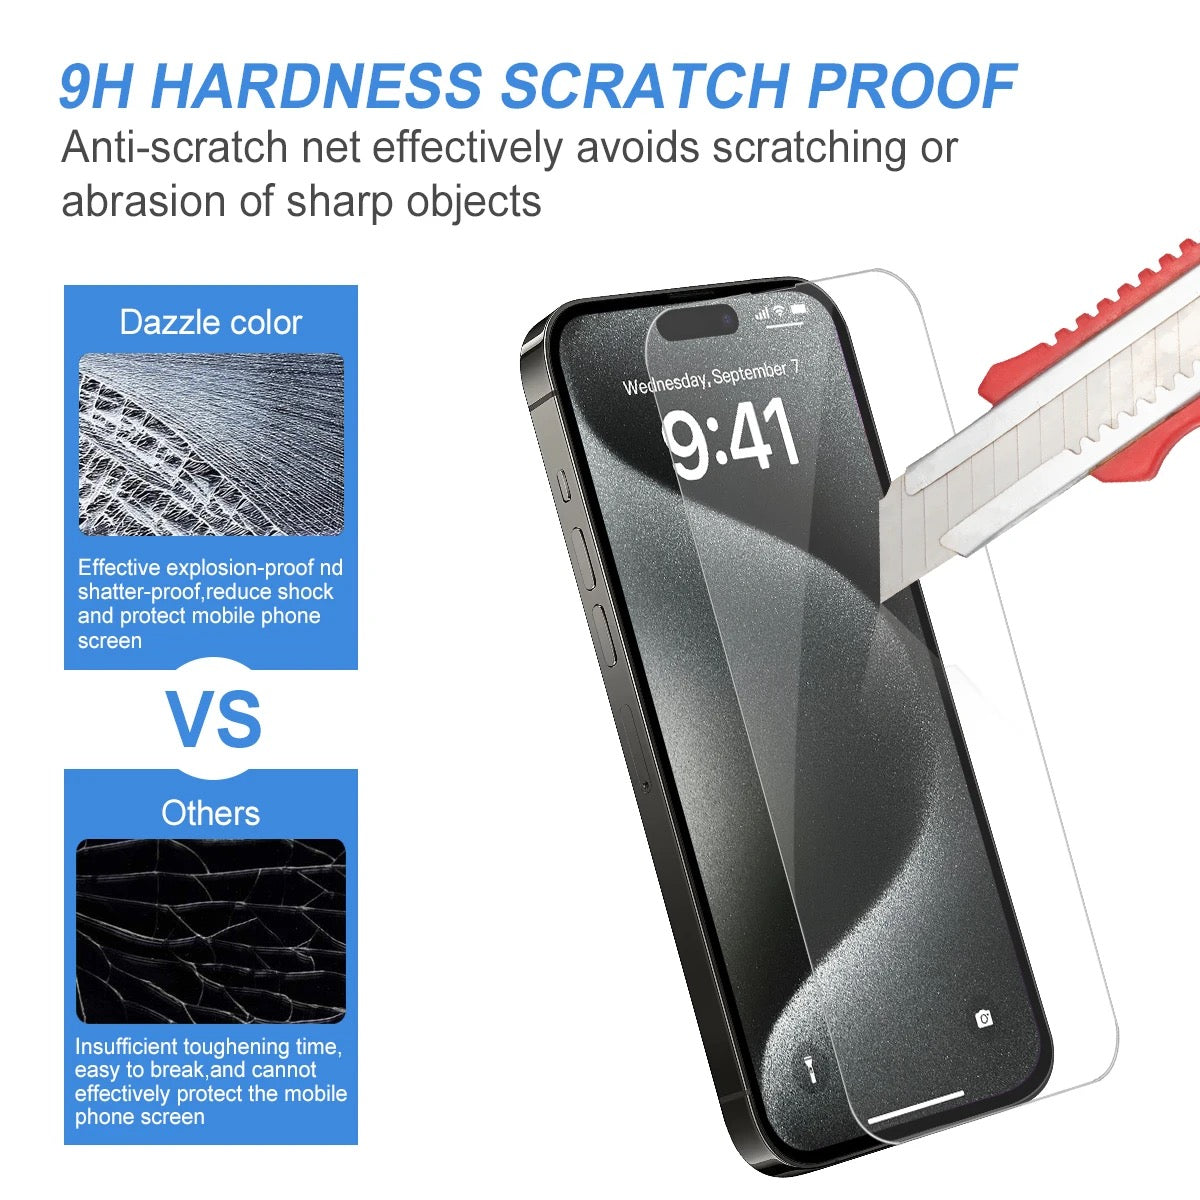 iPhone Compatible Tempered Glass Screen Protectors; Set of 3